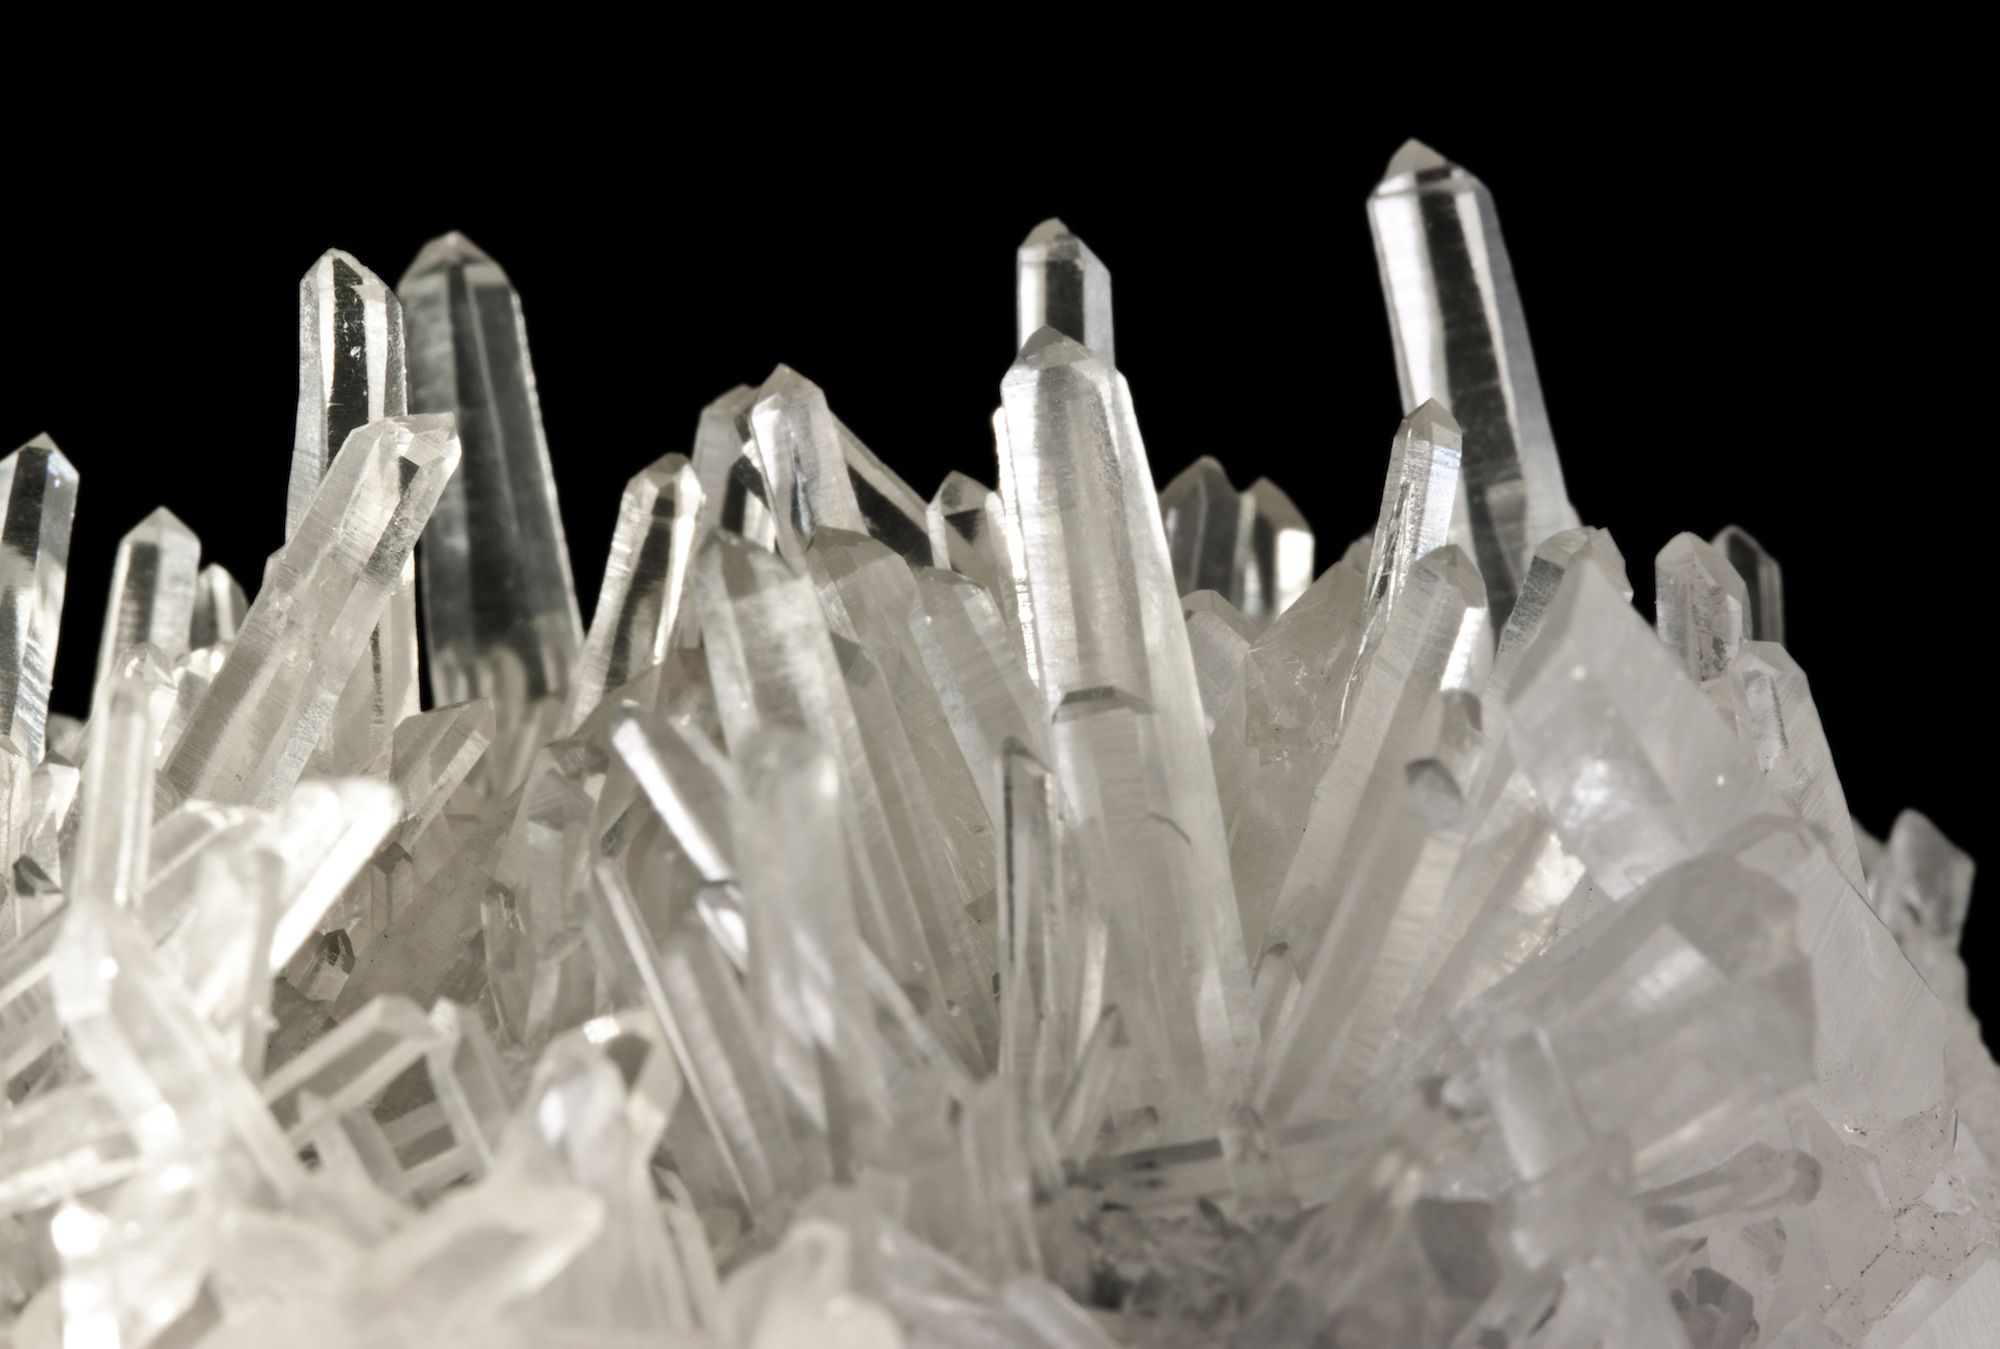 Crystal Growing Kits to Try at Home